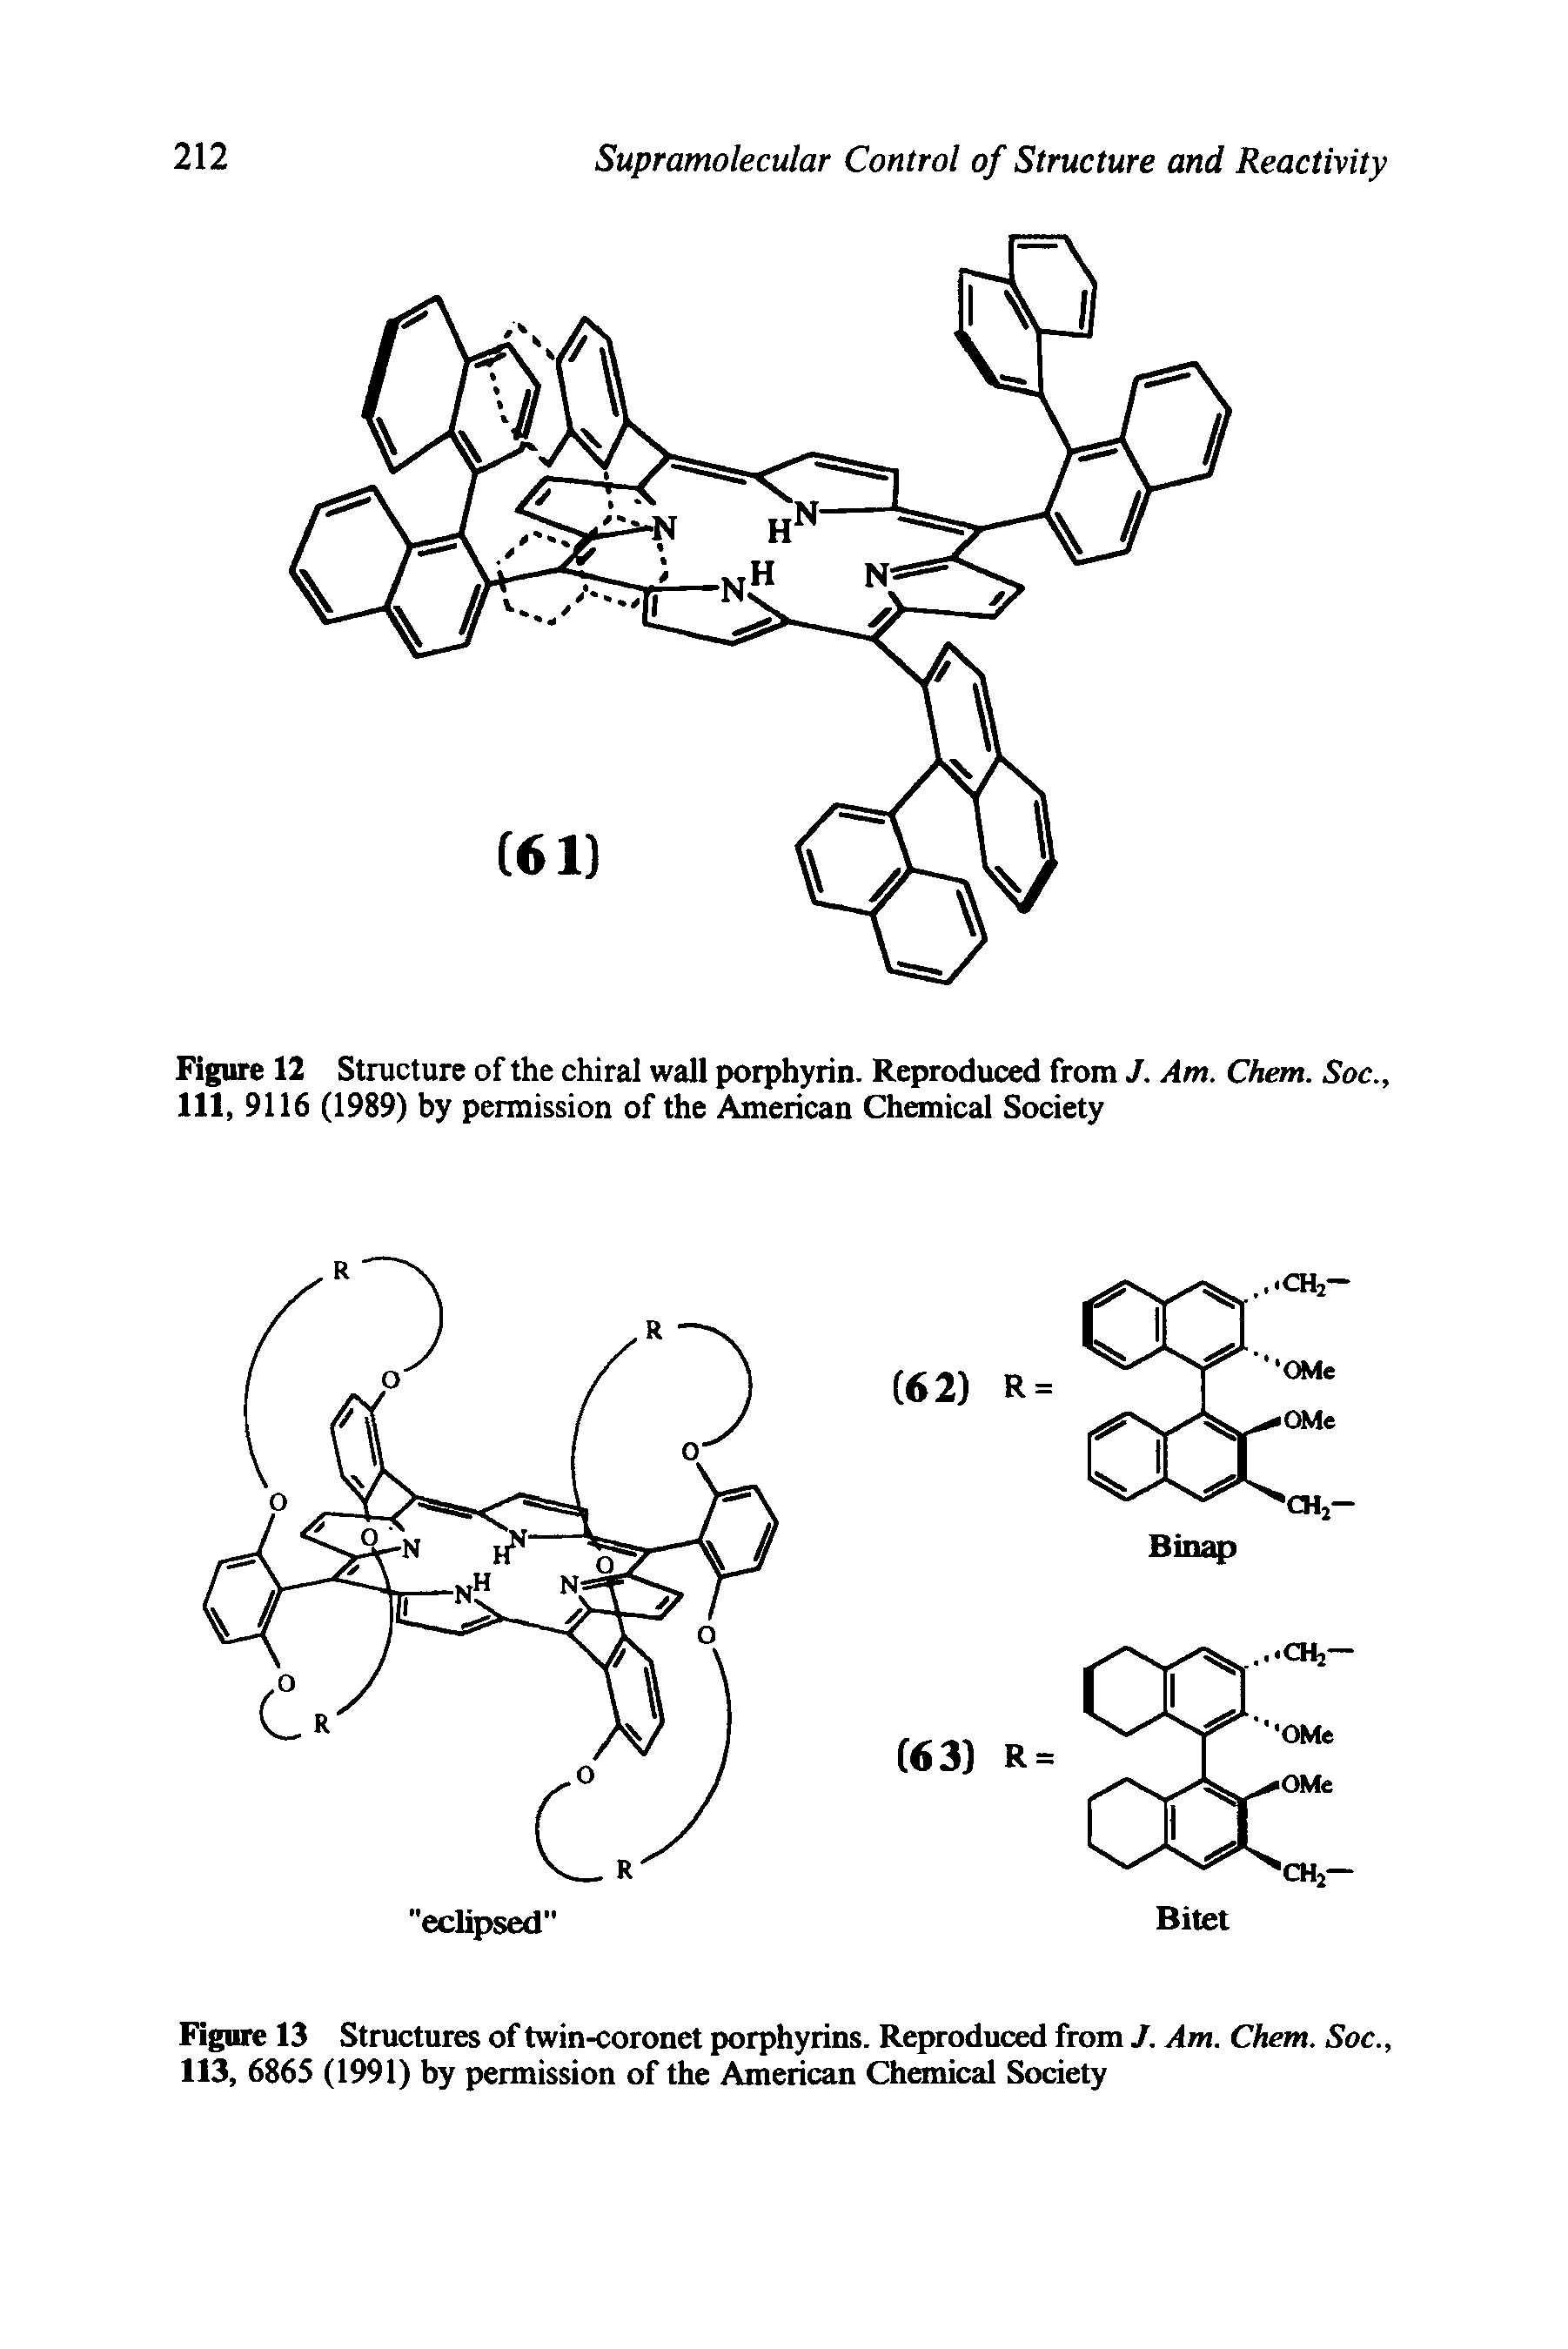 Figure 12 Structure of the chiral wall porphyrin. Reproduced from J. Am. Chem. Soc., Ill, 9116 (1989) by permission of the American Chemical Society...